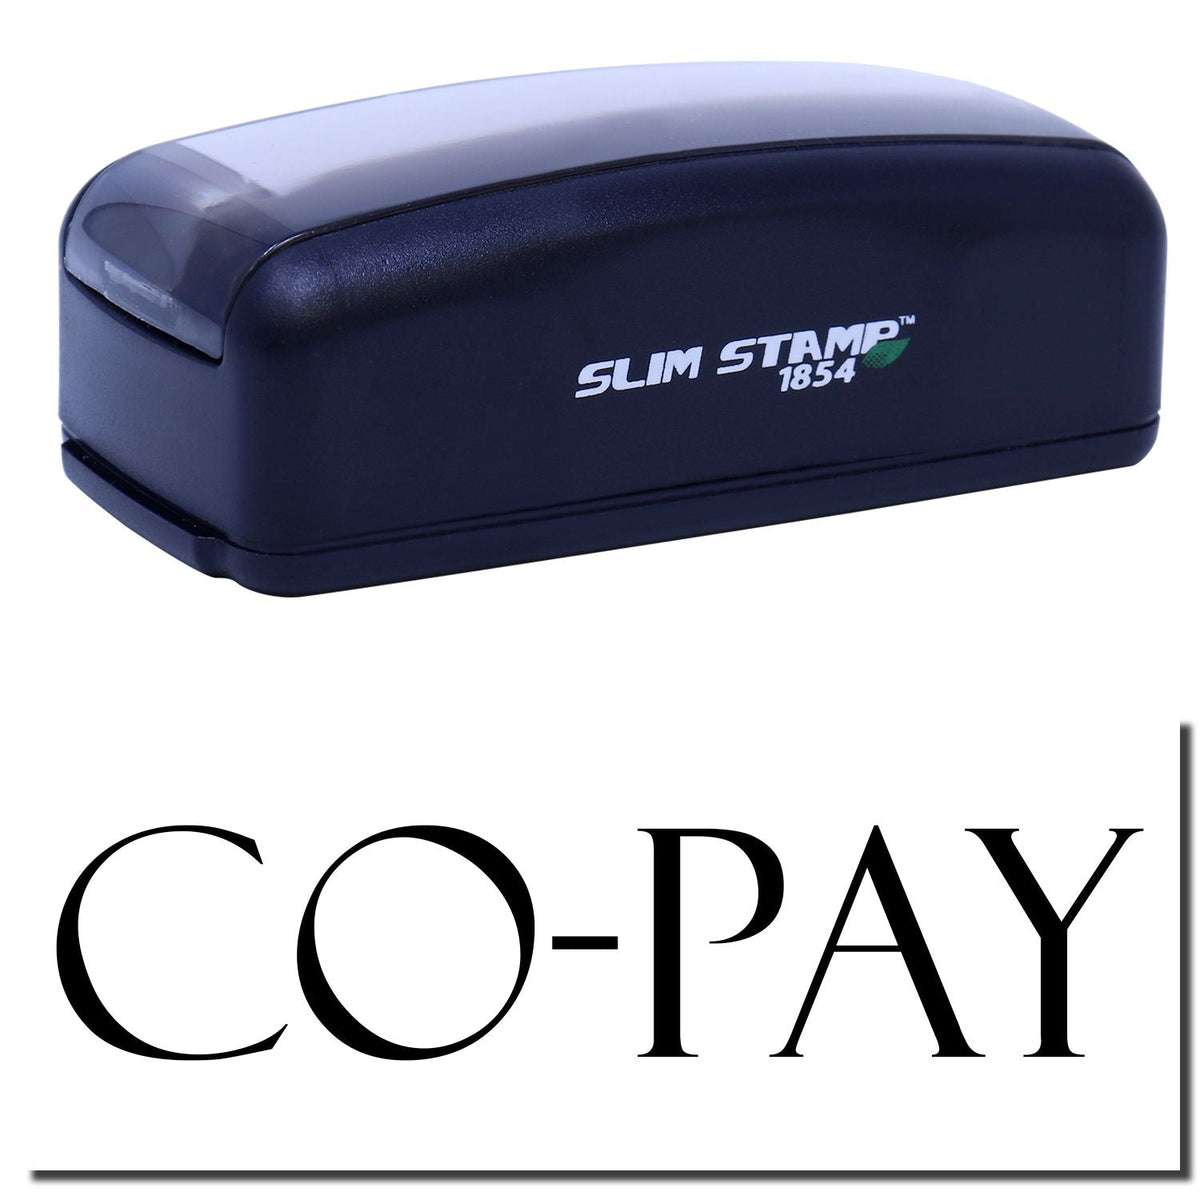 A stock office pre-inked stamp with a stamped image showing how the text &quot;CO-PAY&quot; in a large font is displayed after stamping.